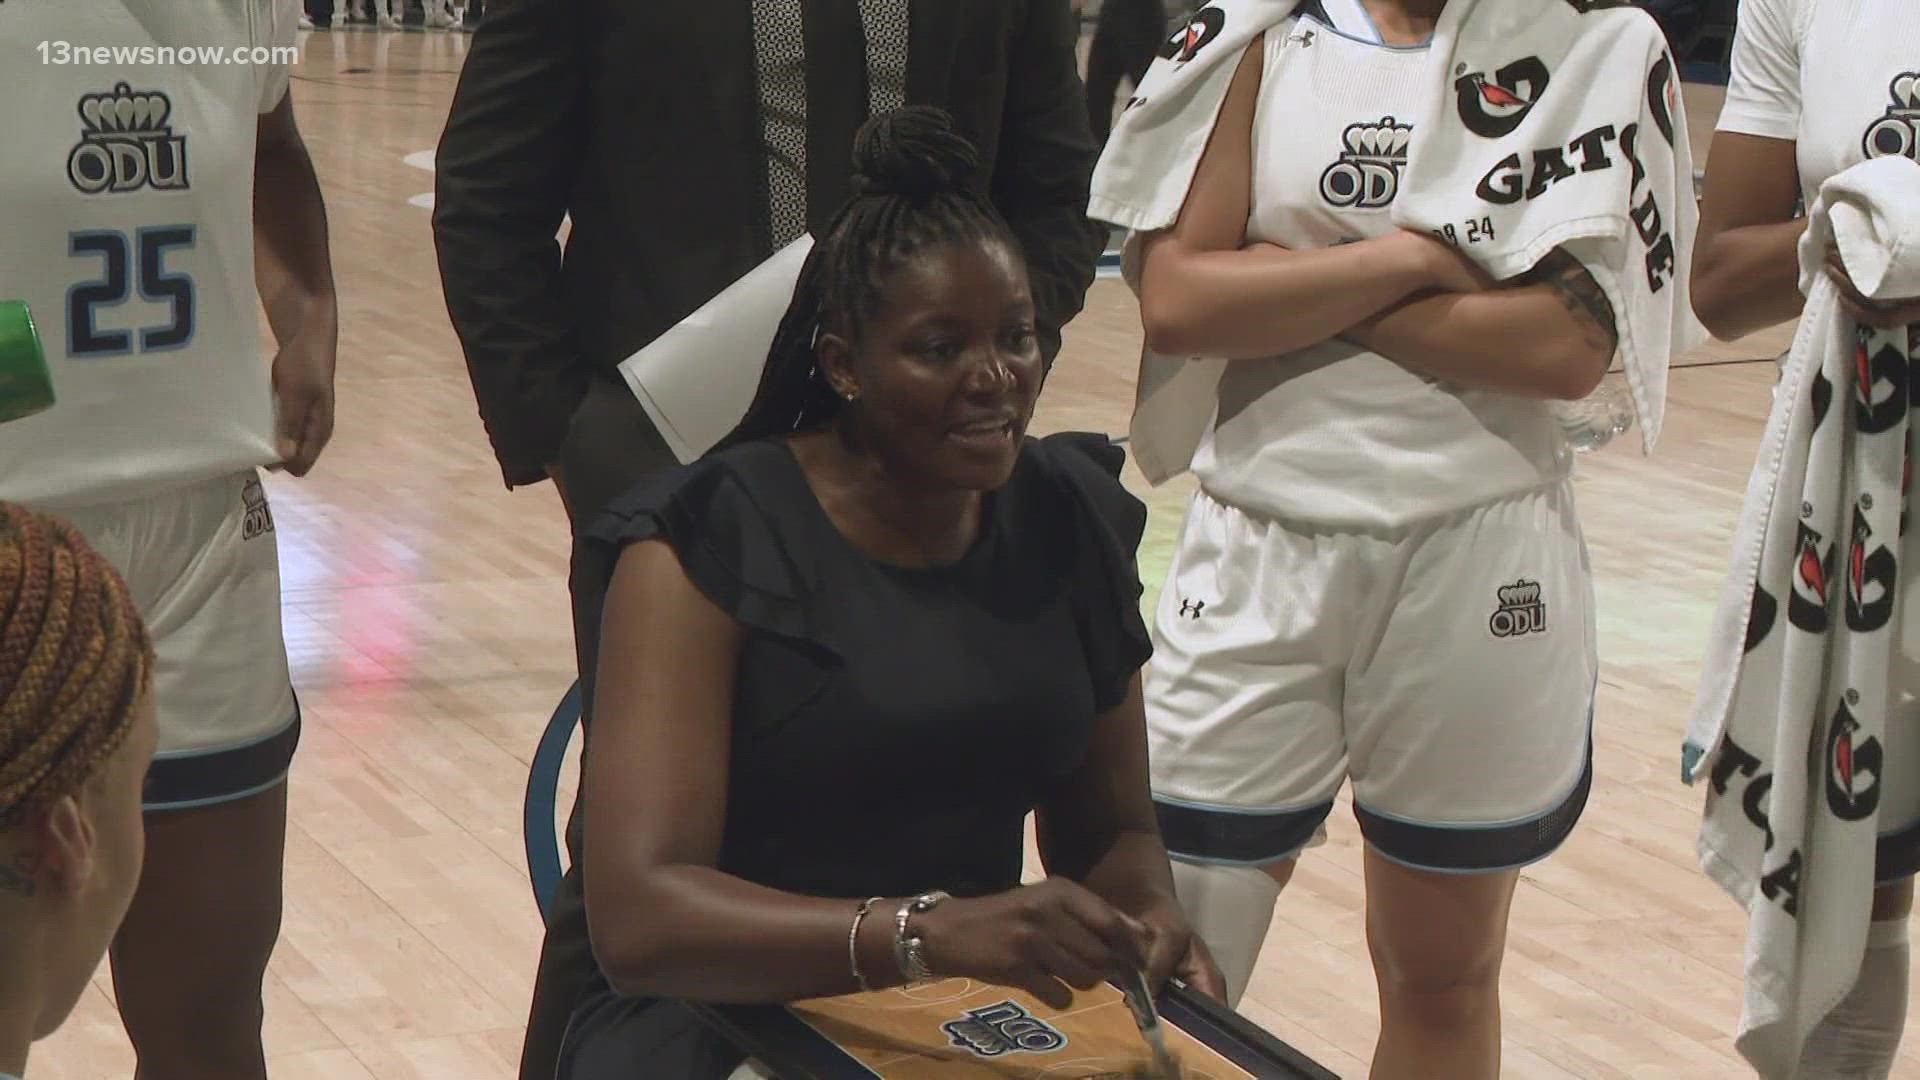 The ODU women's basketball coach is part of the Women's Basketball Hall of Fame Class of 2022